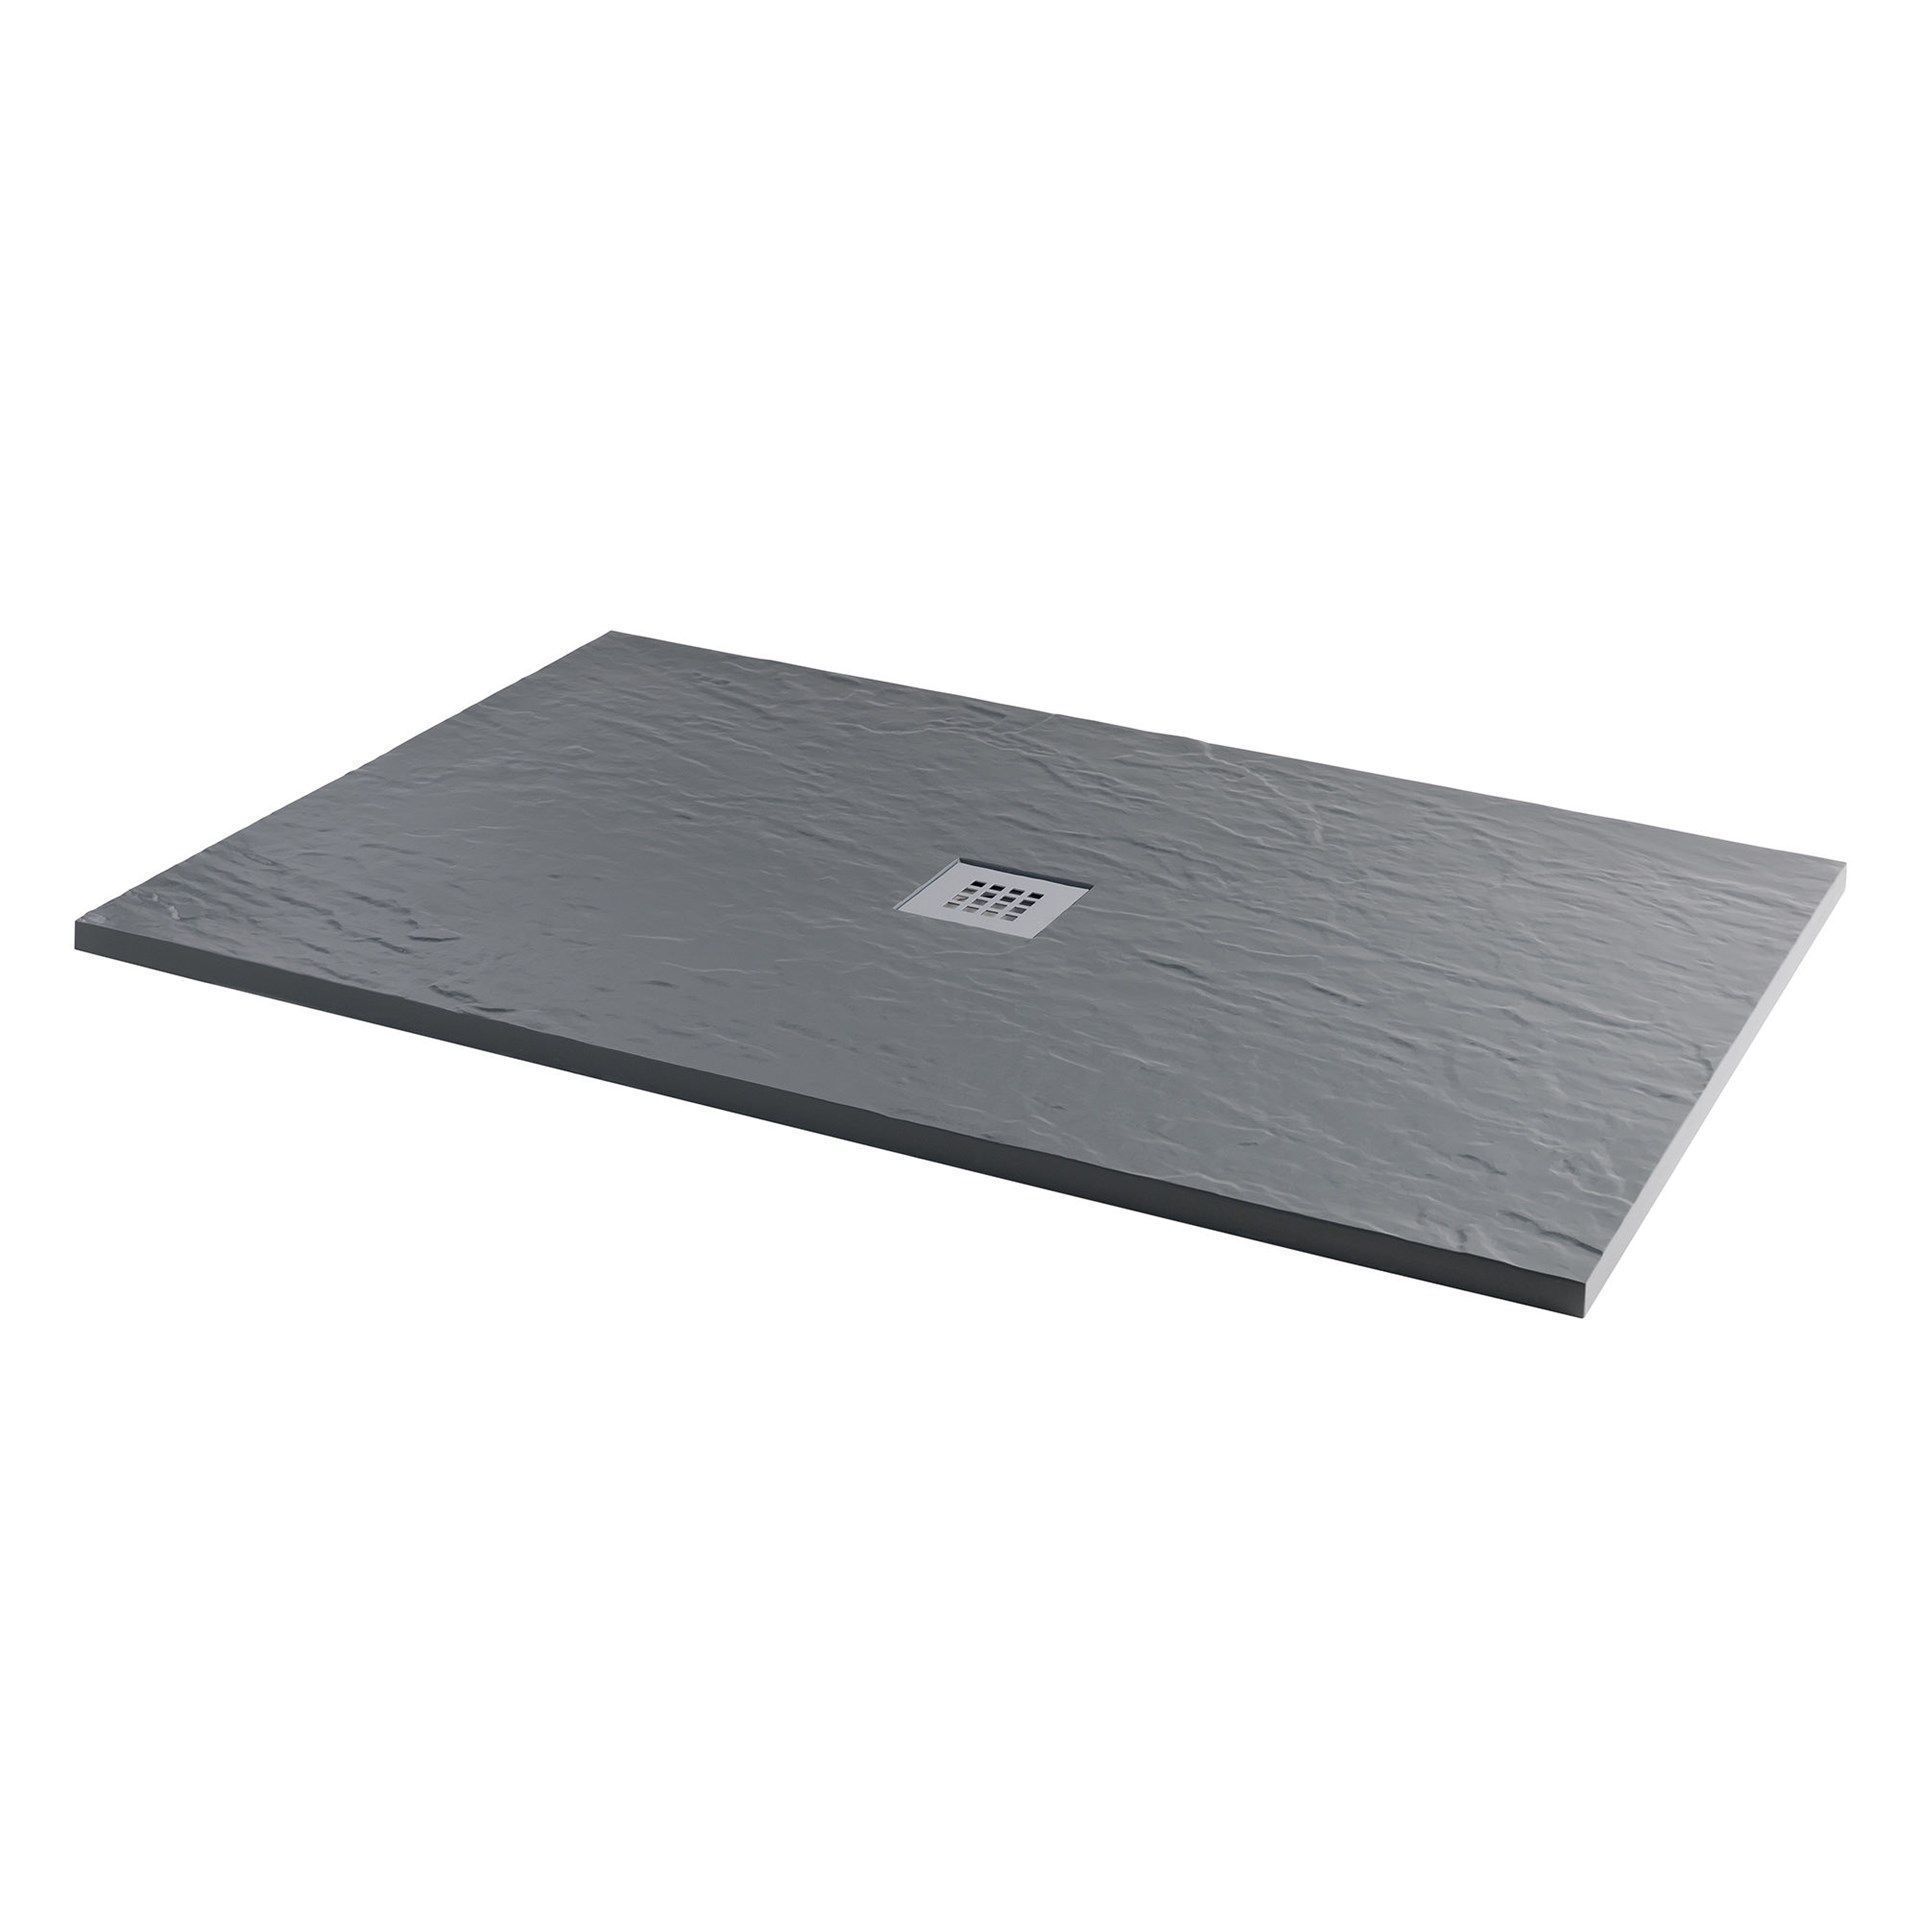 New 1000x800mm Rectangular Slate Effect Shower Tray In Grey. Manufactured In The Uk From High ... - Image 2 of 2